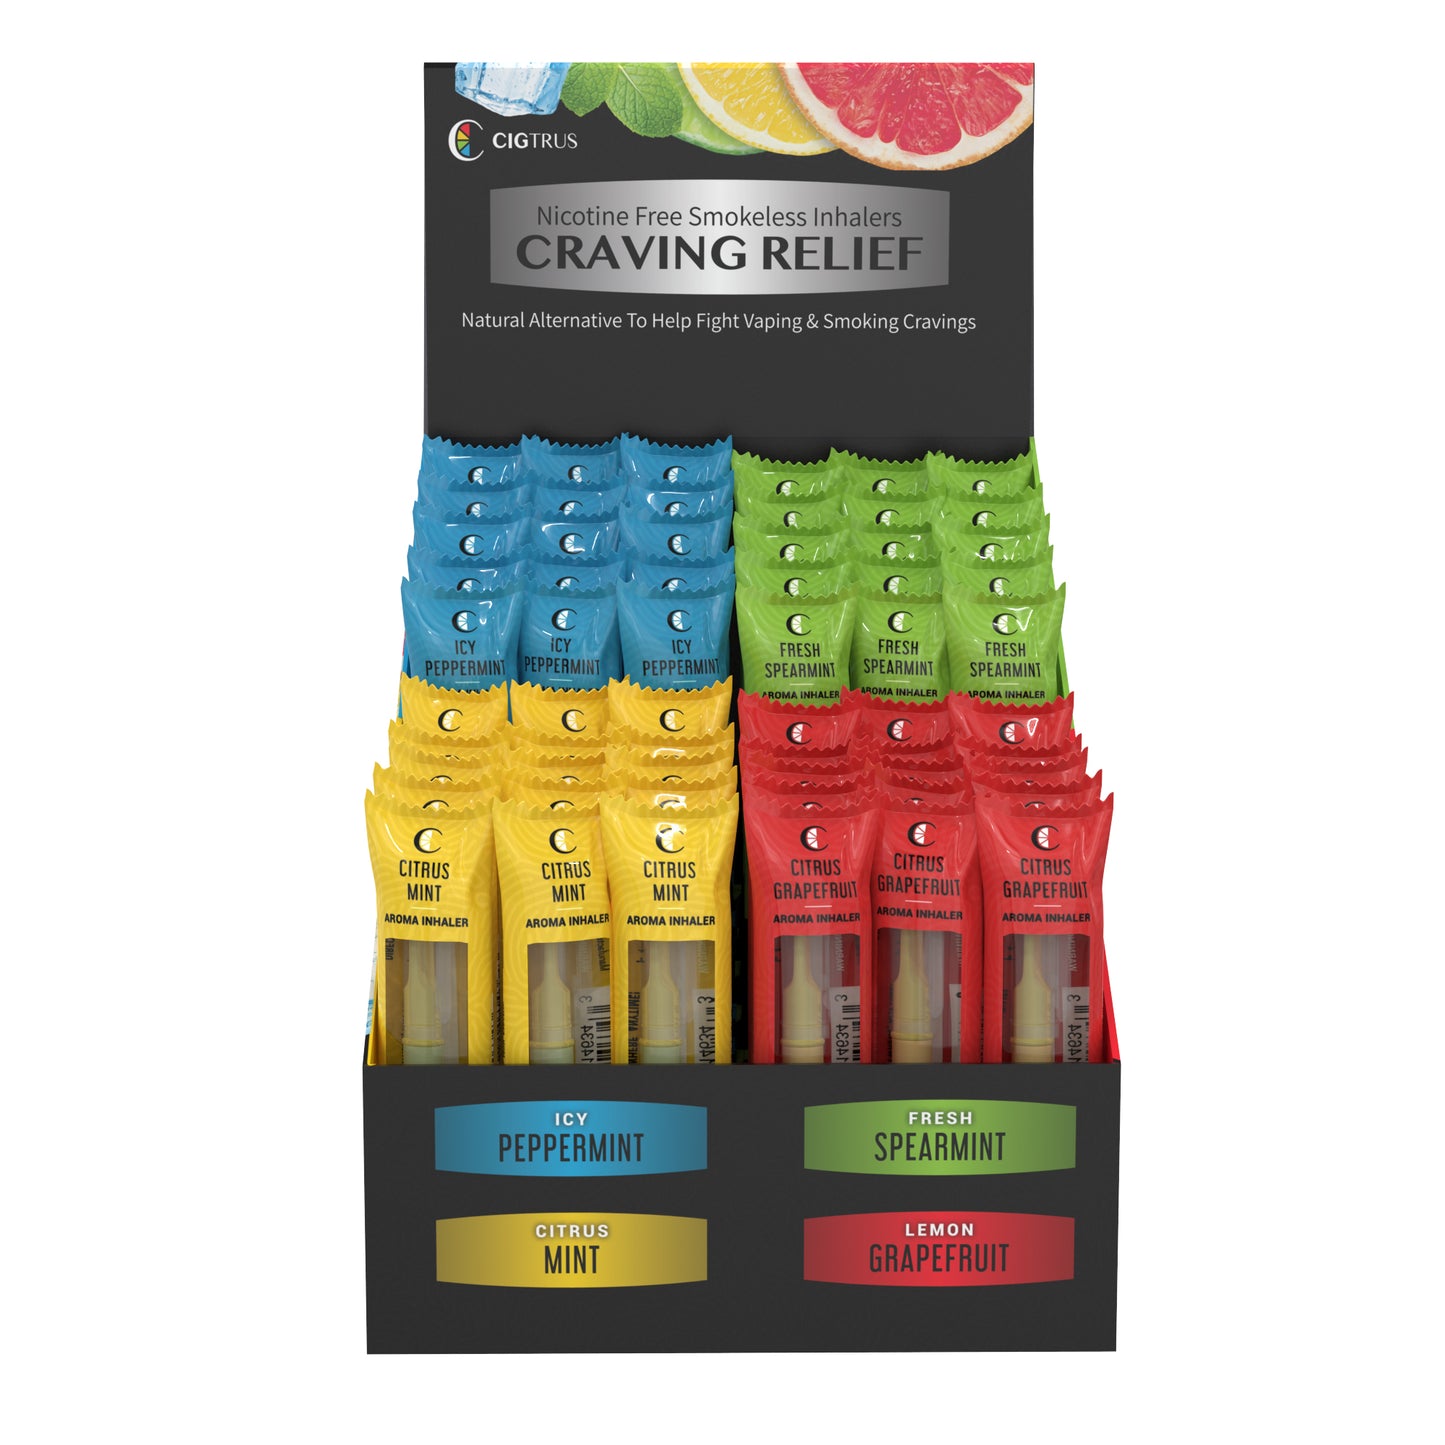 4 Unique Flavors 20 each Discover a delightful variety of flavors to tantalize your taste buds Perfect for sharing at parties offices or any gathering Smokeless and Long lasting Enjoy the delicious taste without the smoke or mess Each inhaler provides extended satisfaction